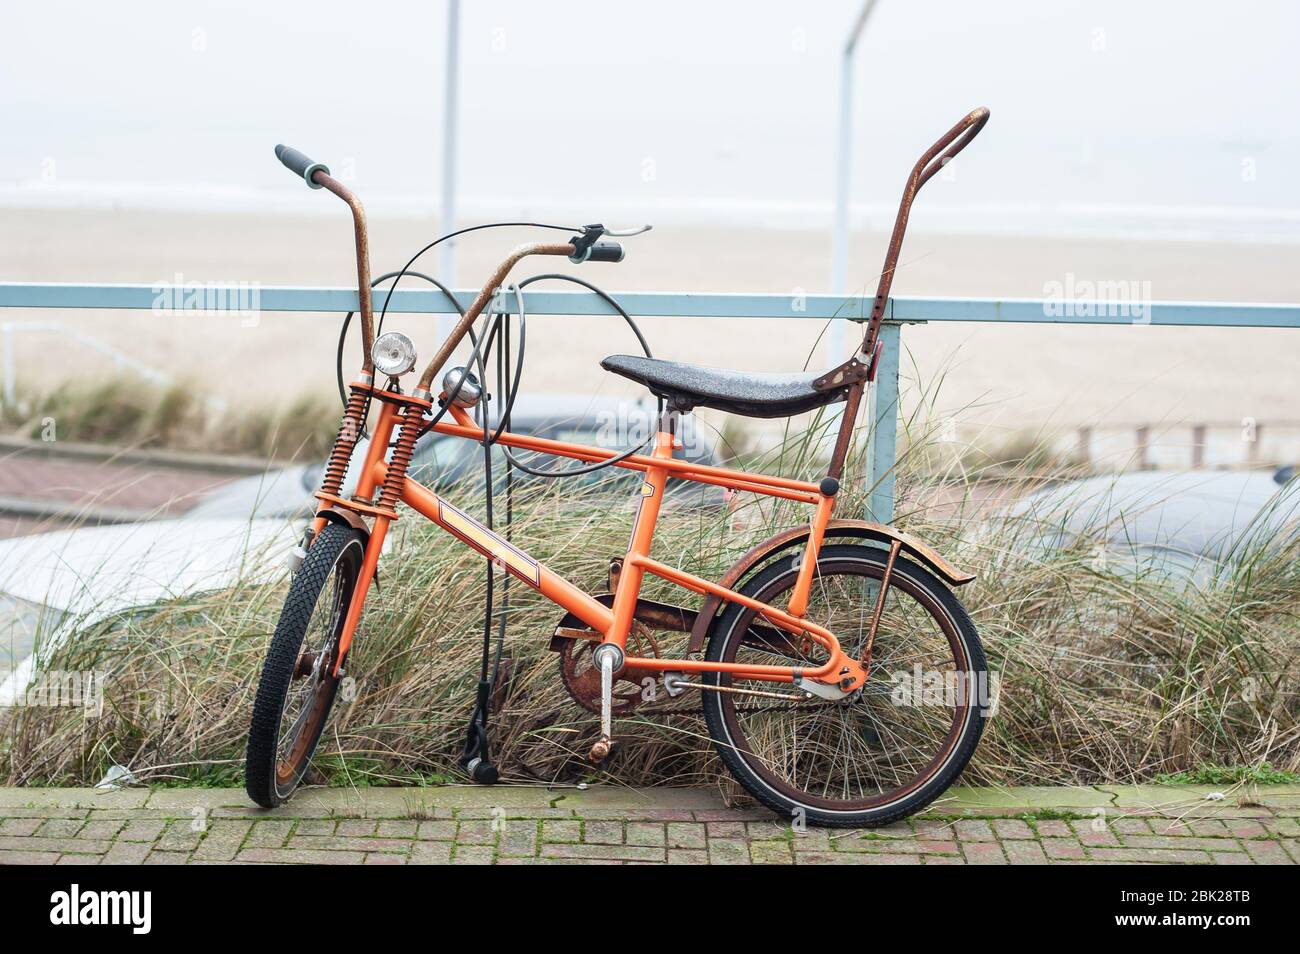 Old holland classic banana seat bicycle vintage bicycle in public.  Cityscape view. Dutch lifestyle Stock Photo - Alamy